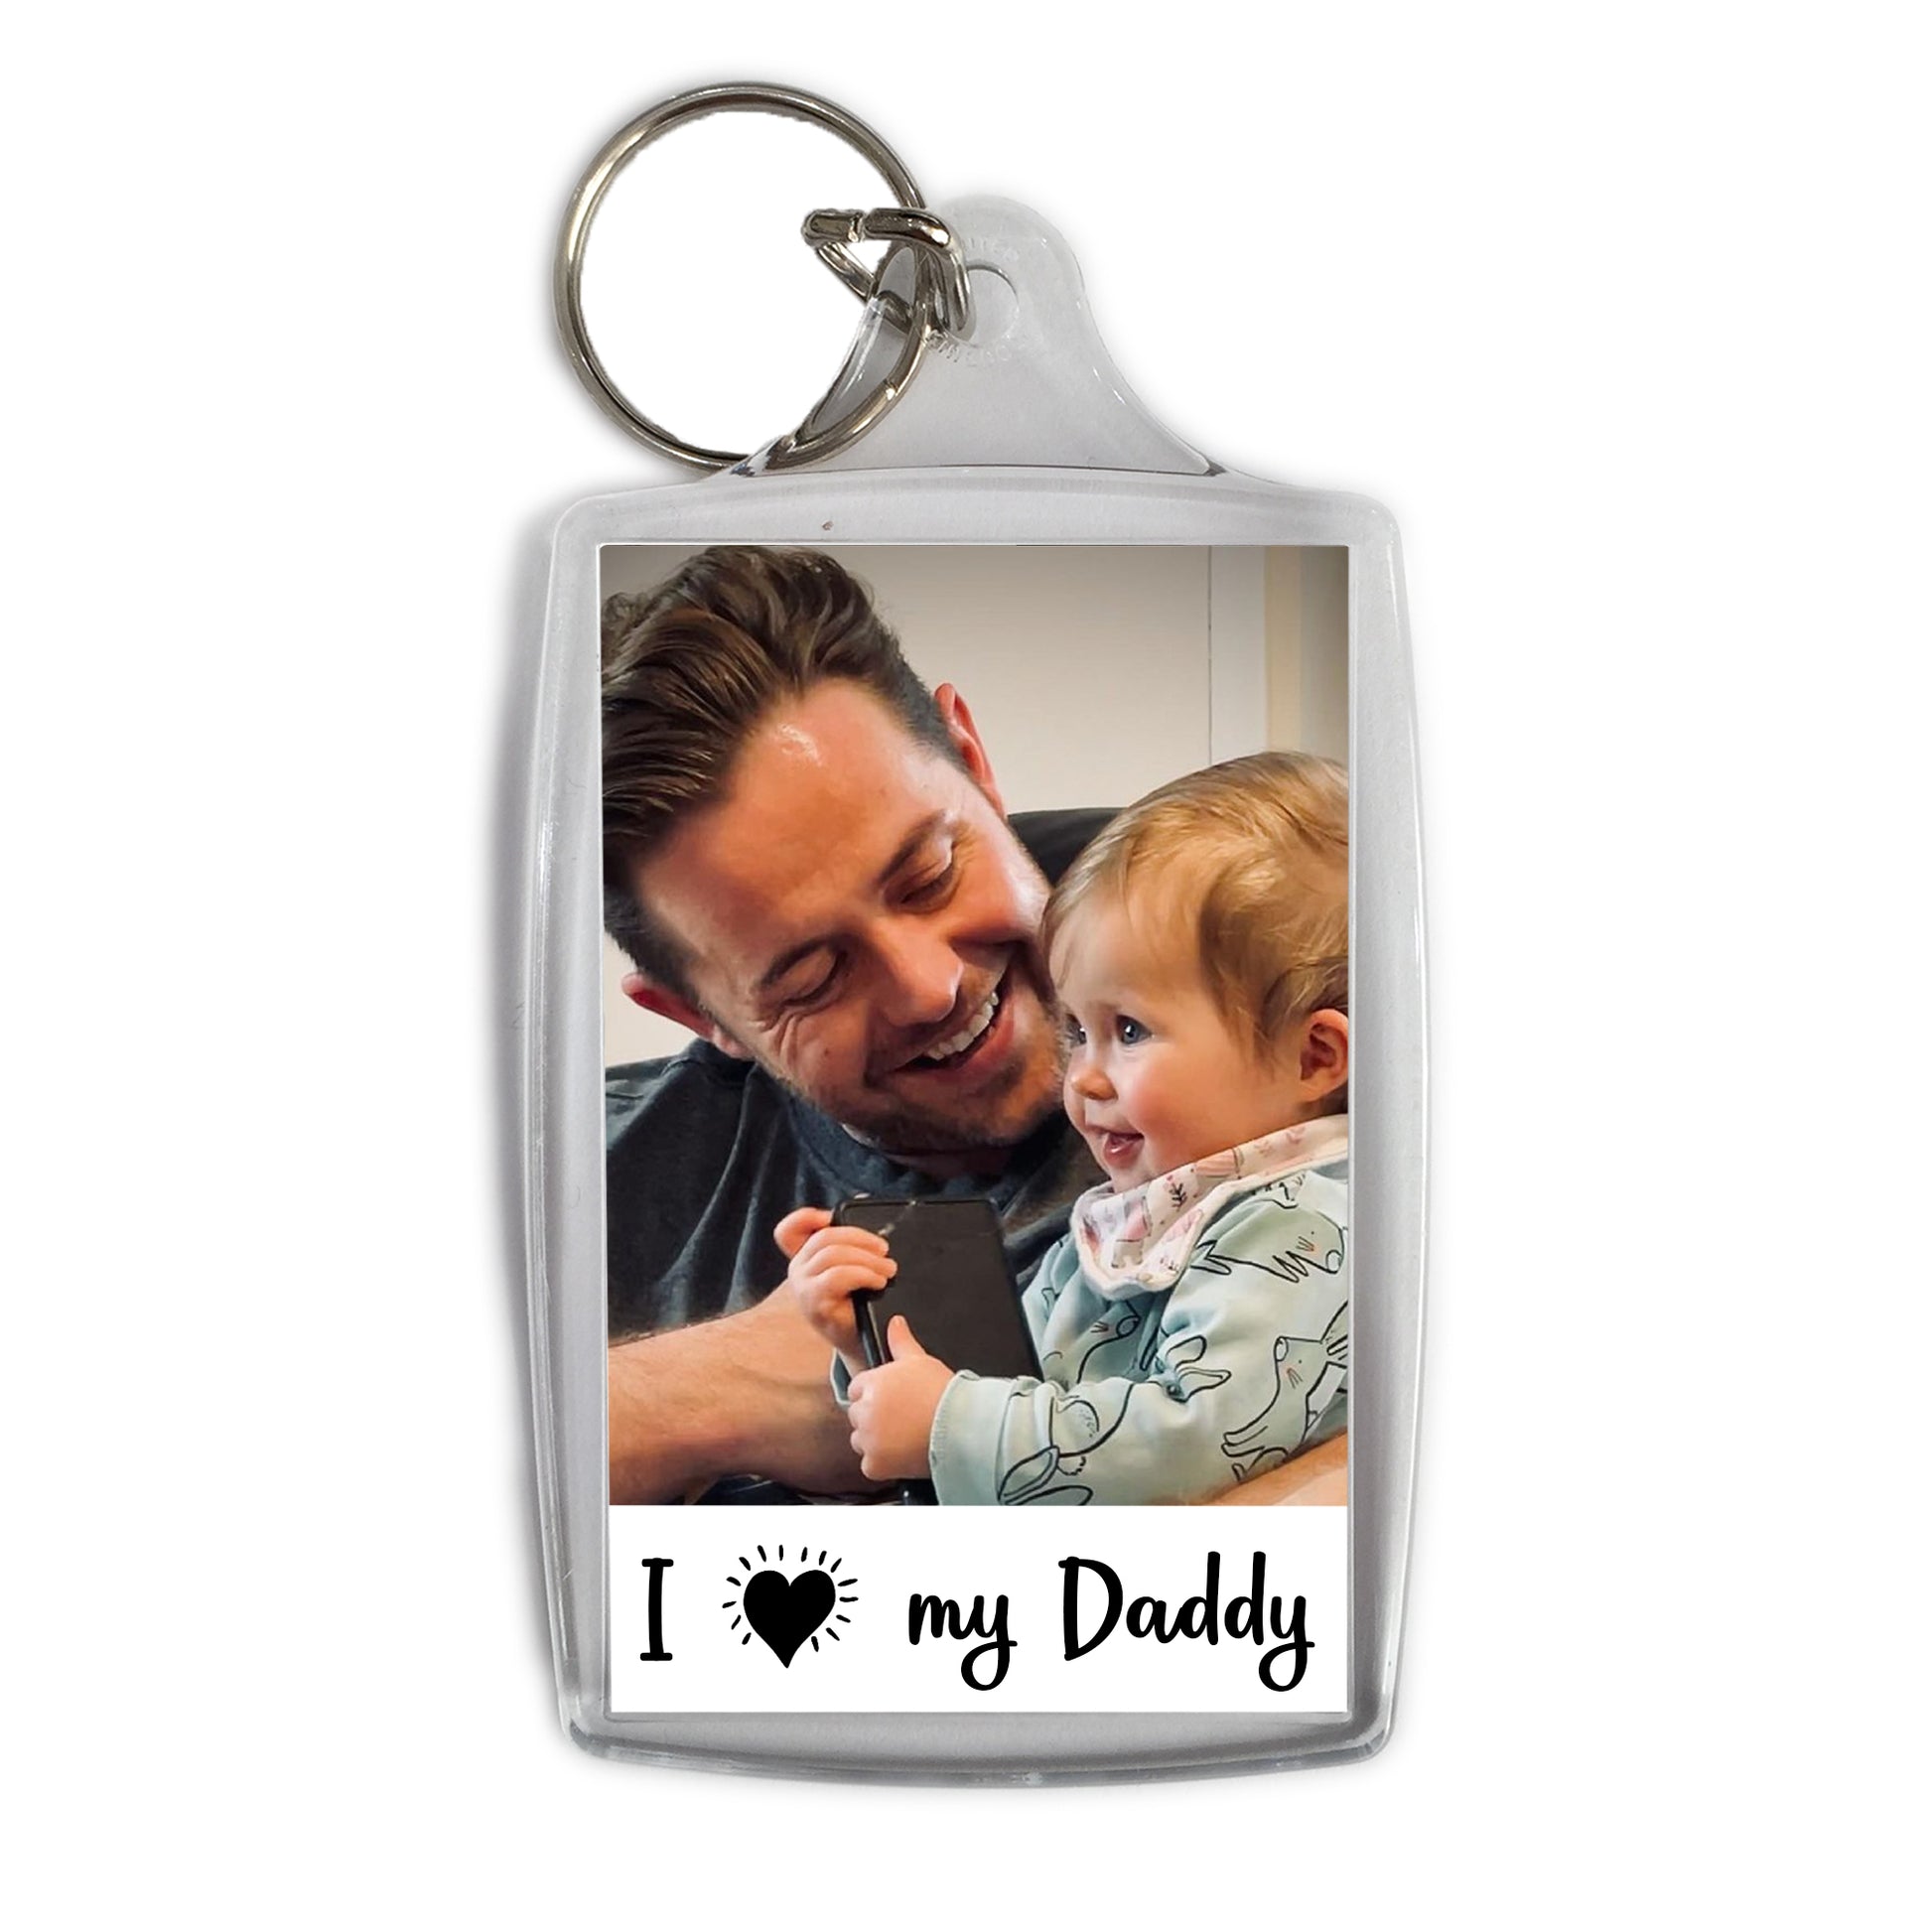 Personalised Photo Paper Keyring & Magnet - I Heart my Daddy 